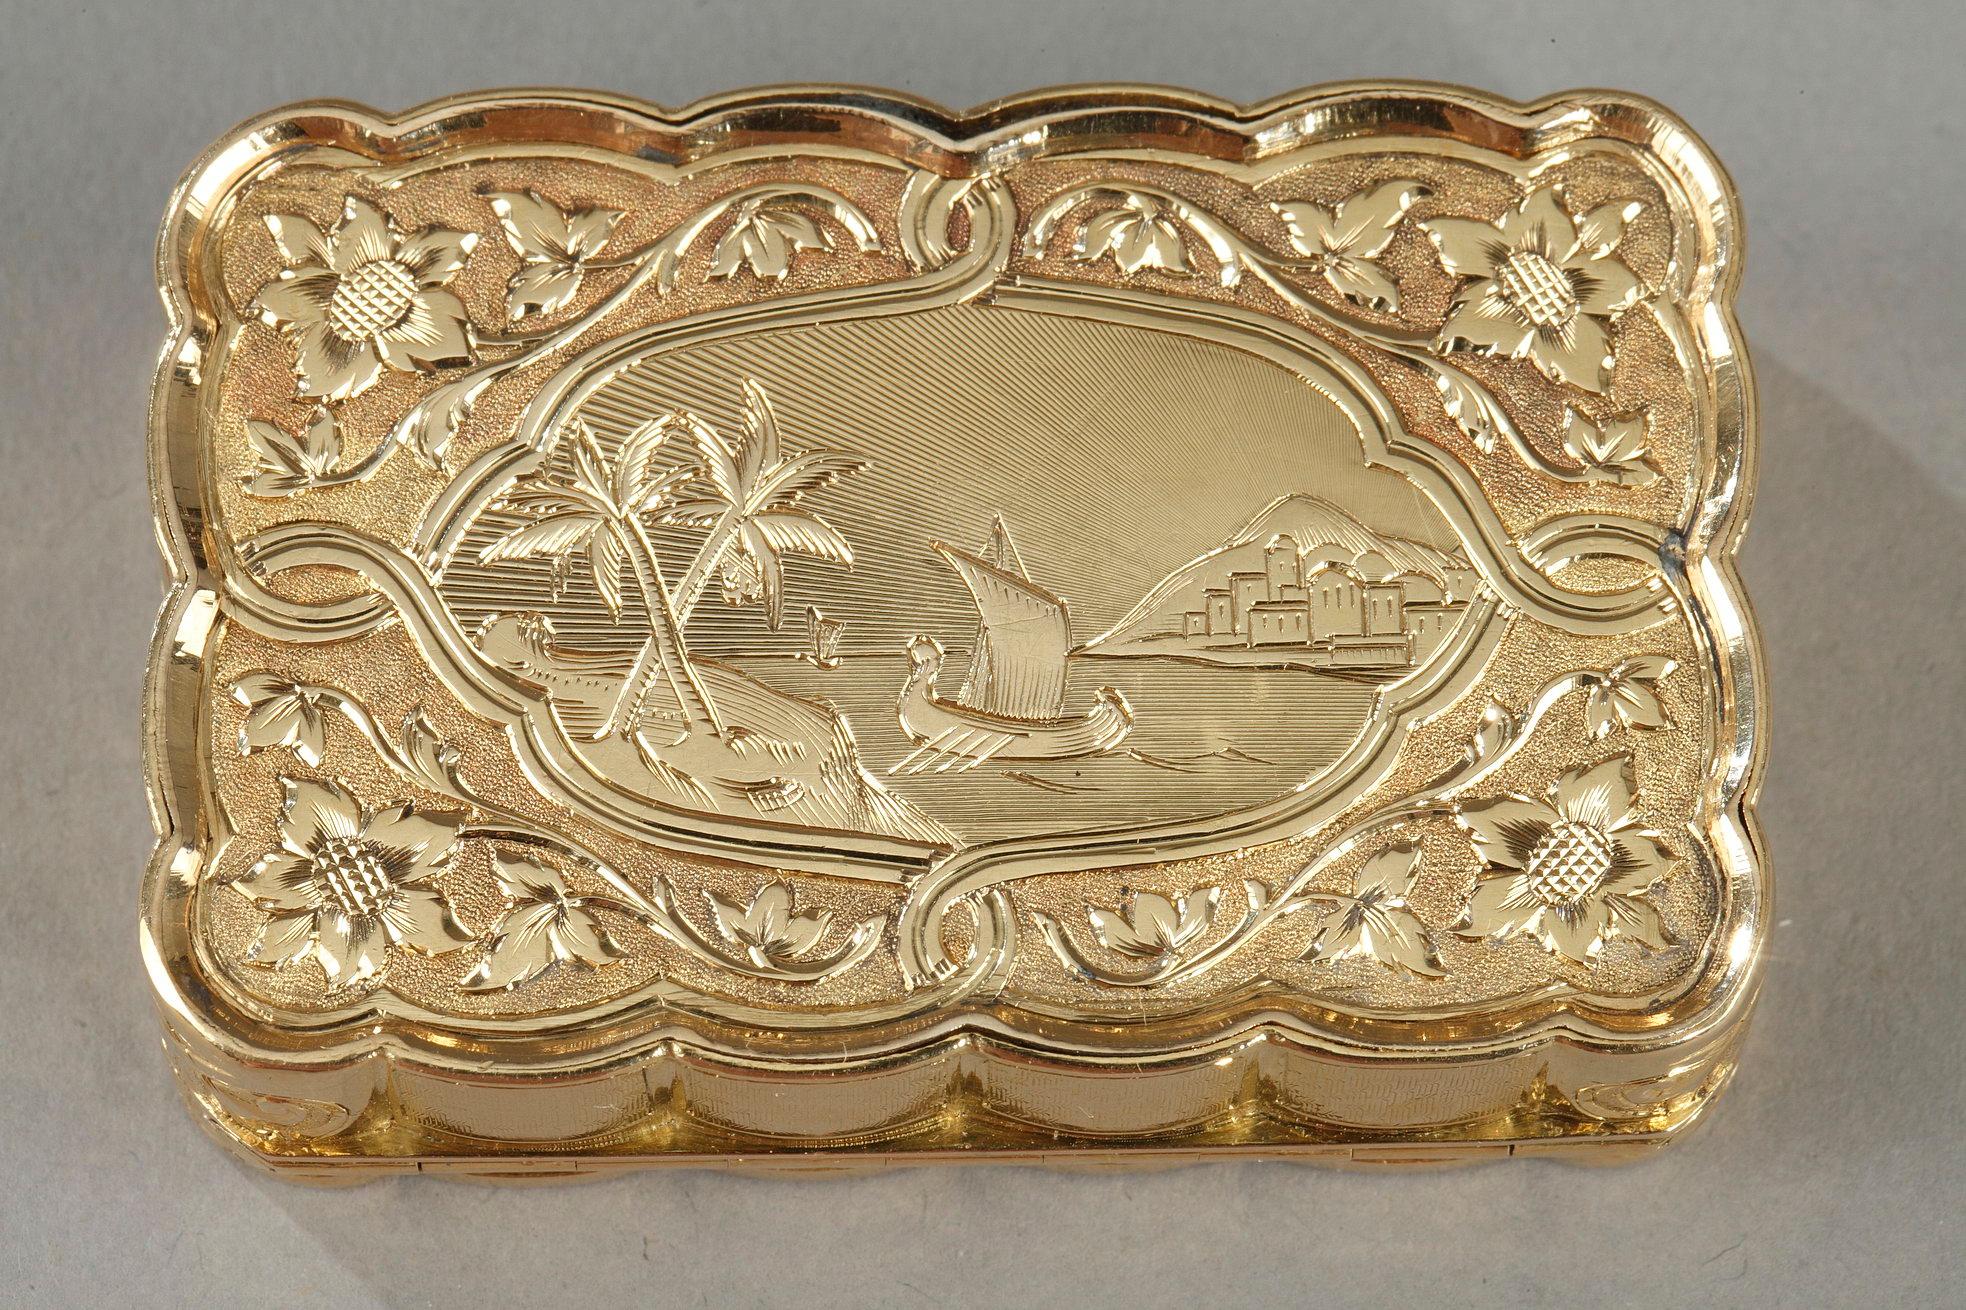 Swiss Enamelled Gold Snuff-Box for the Oriental Market, circa 1820-1830 For Sale 1